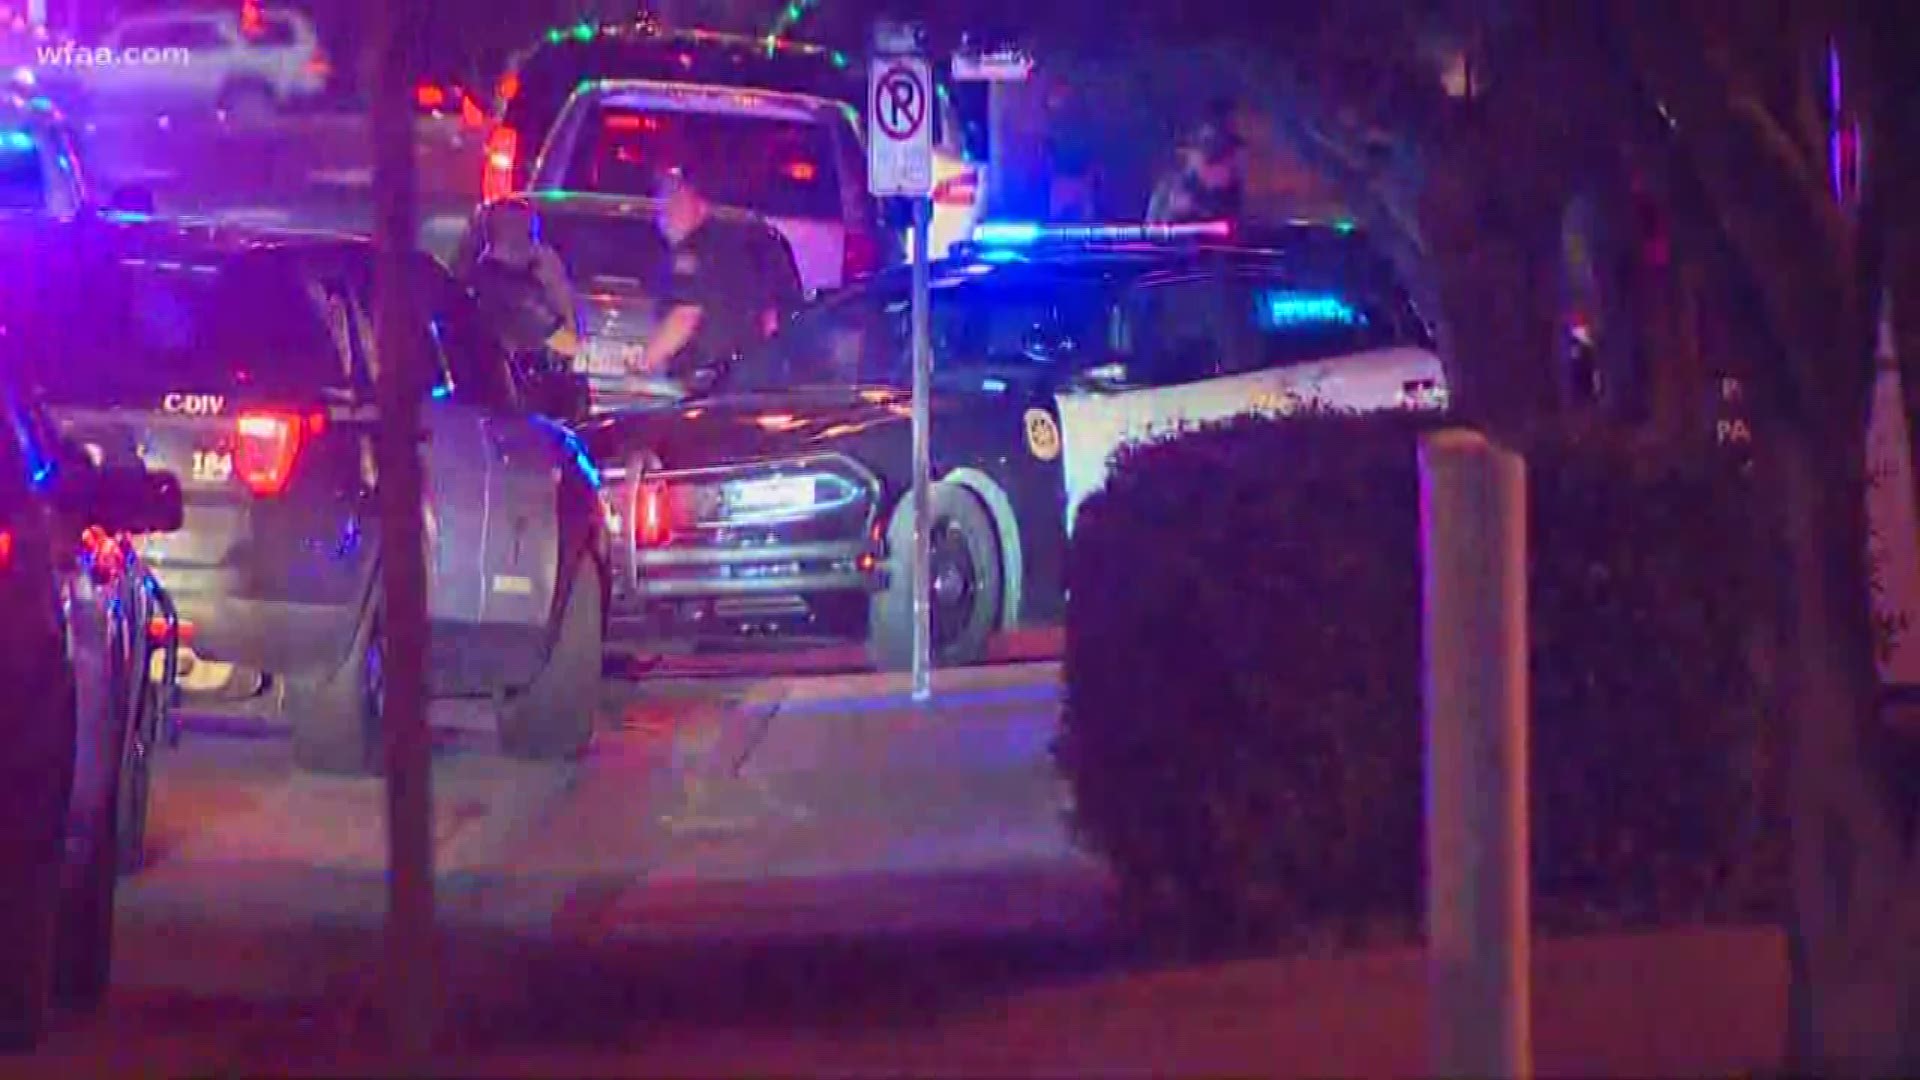 Police in Fort Worth are responding to an officer down call at the Tarrant County Sheriff's Office in Fort Worth.